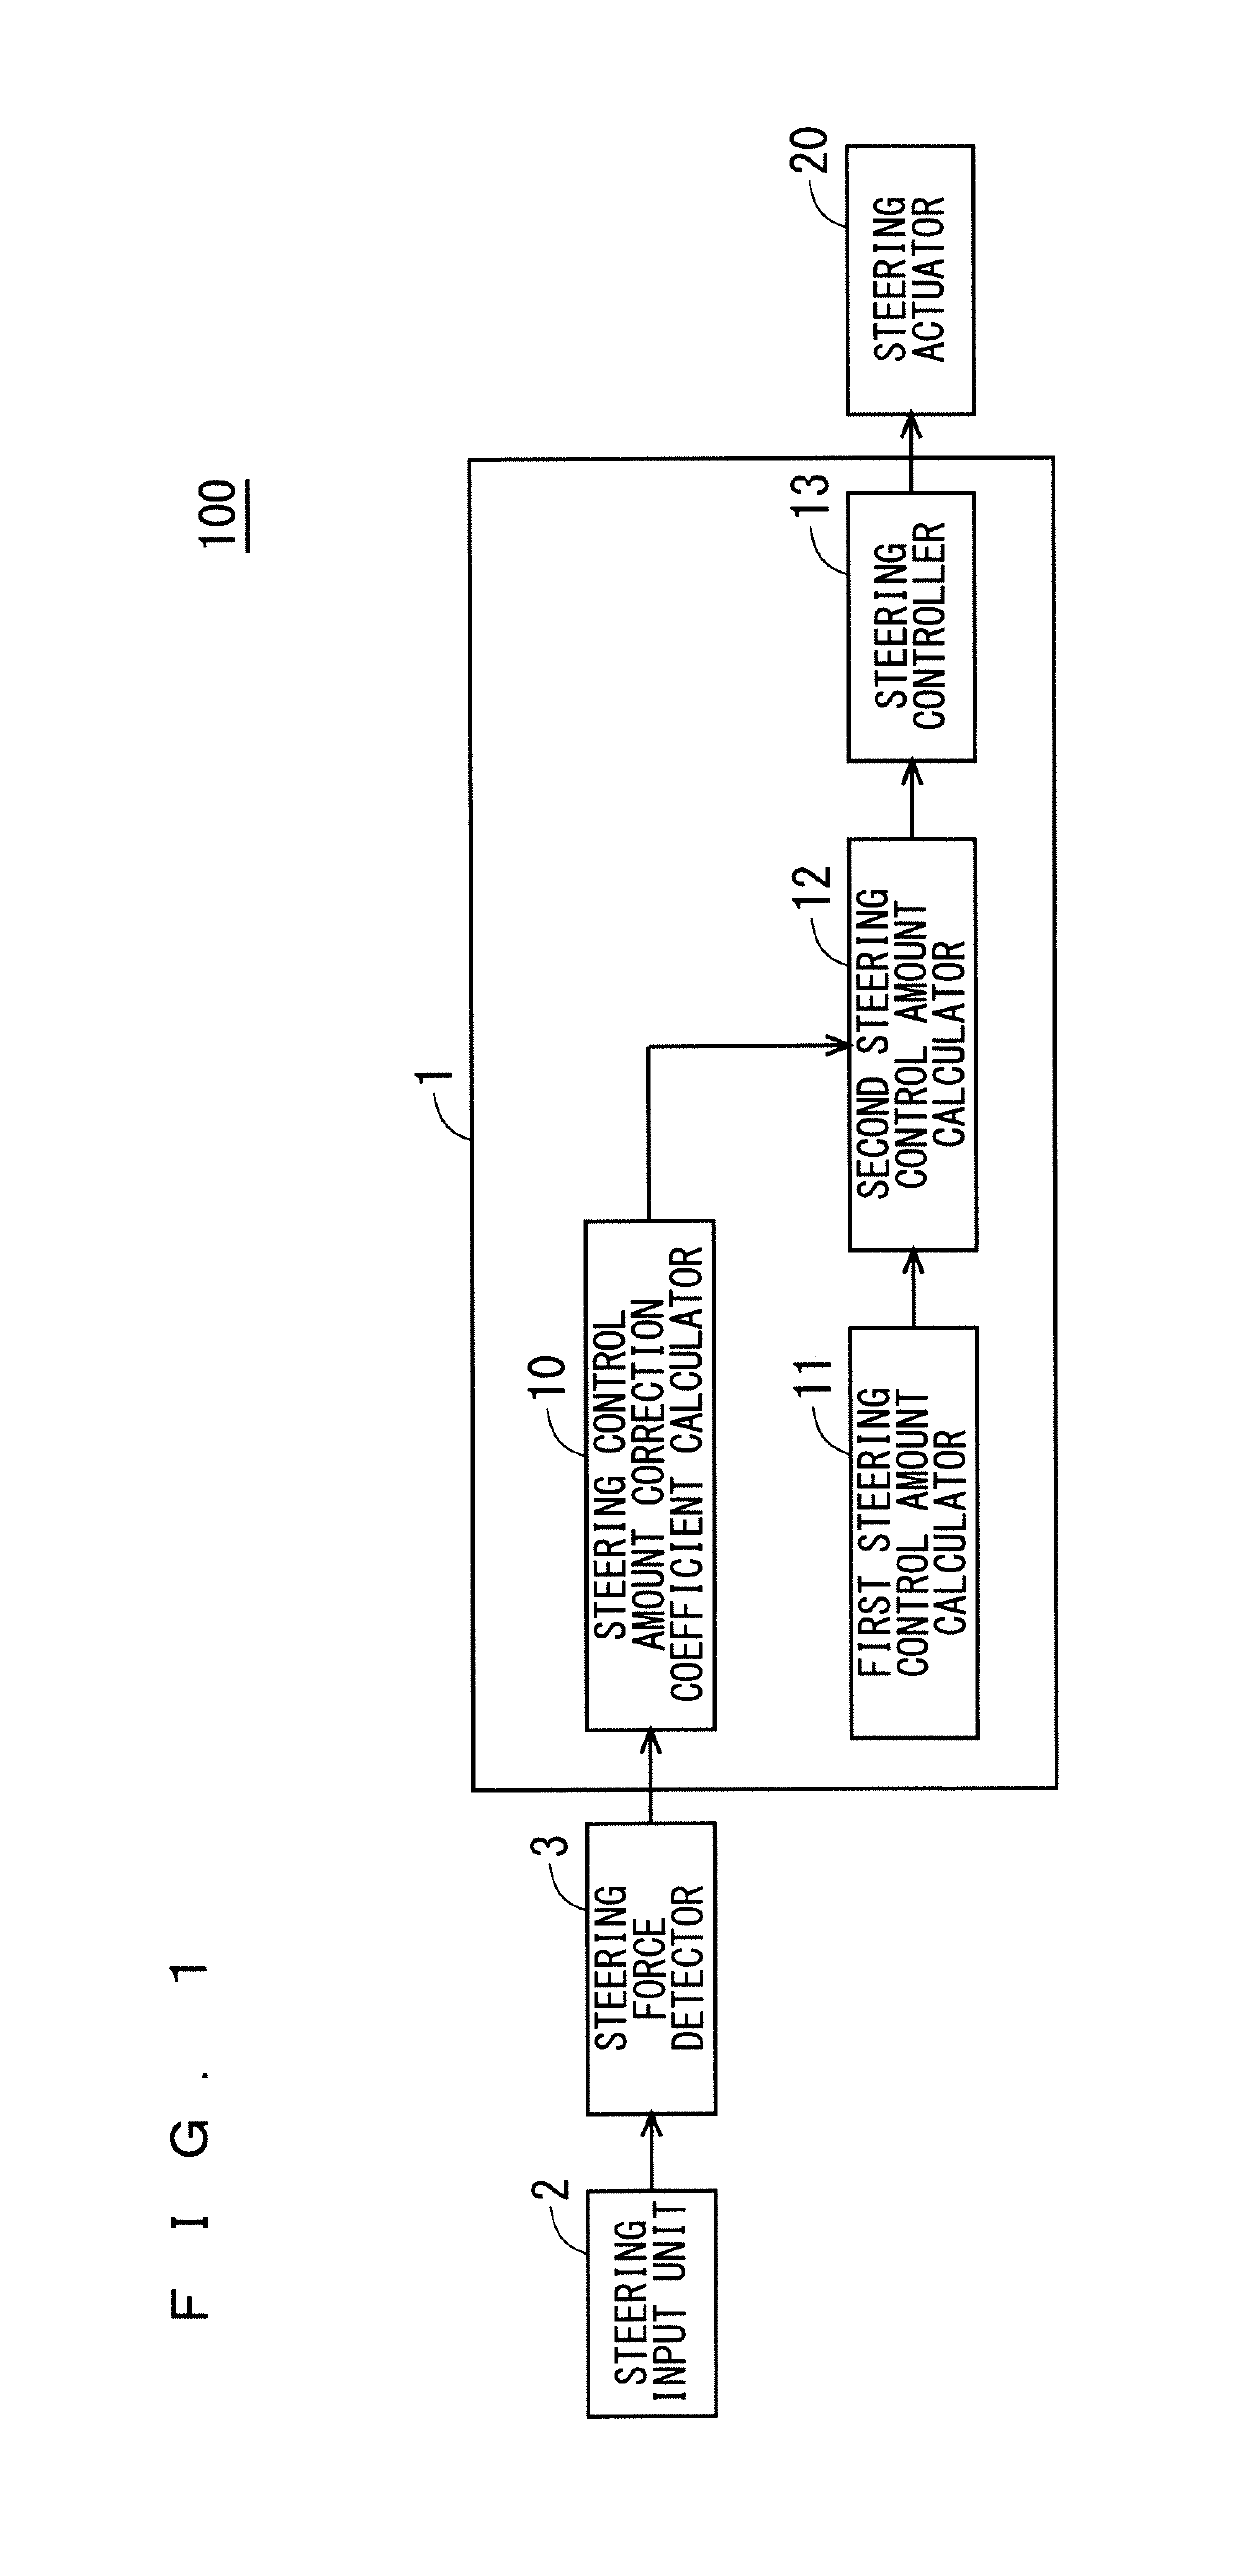 Vehicle steering system and lane keeping system